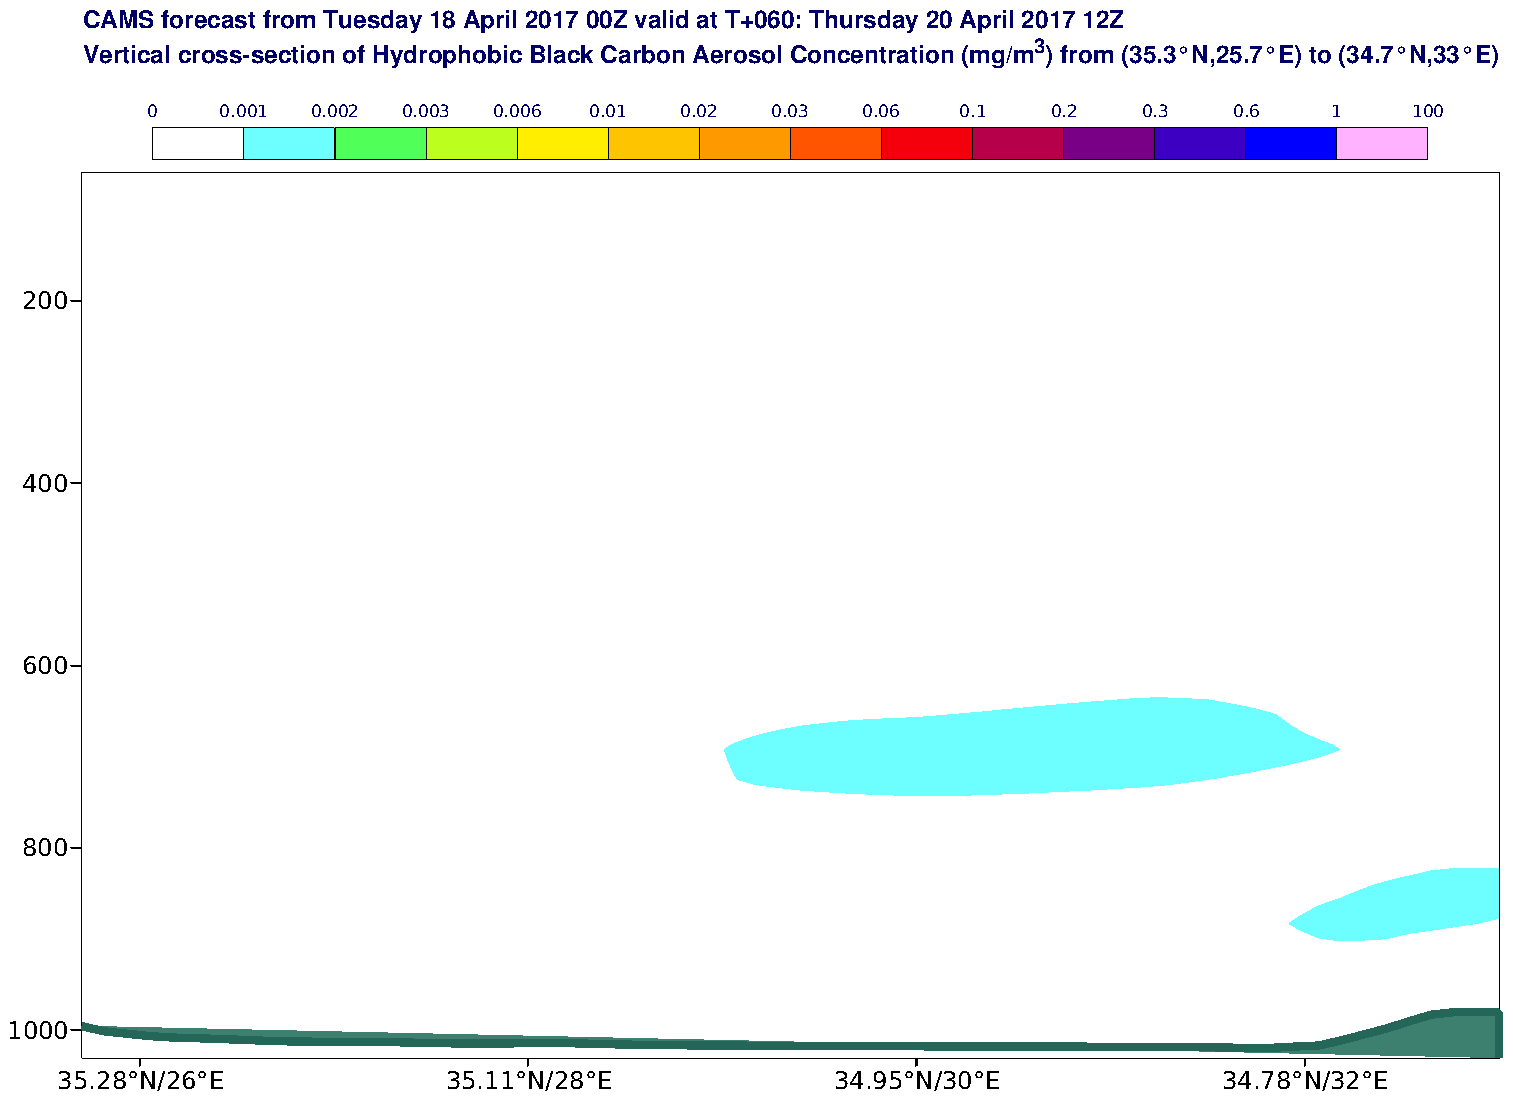 Vertical cross-section of Hydrophobic Black Carbon Aerosol Concentration (mg/m3) valid at T60 - 2017-04-20 12:00